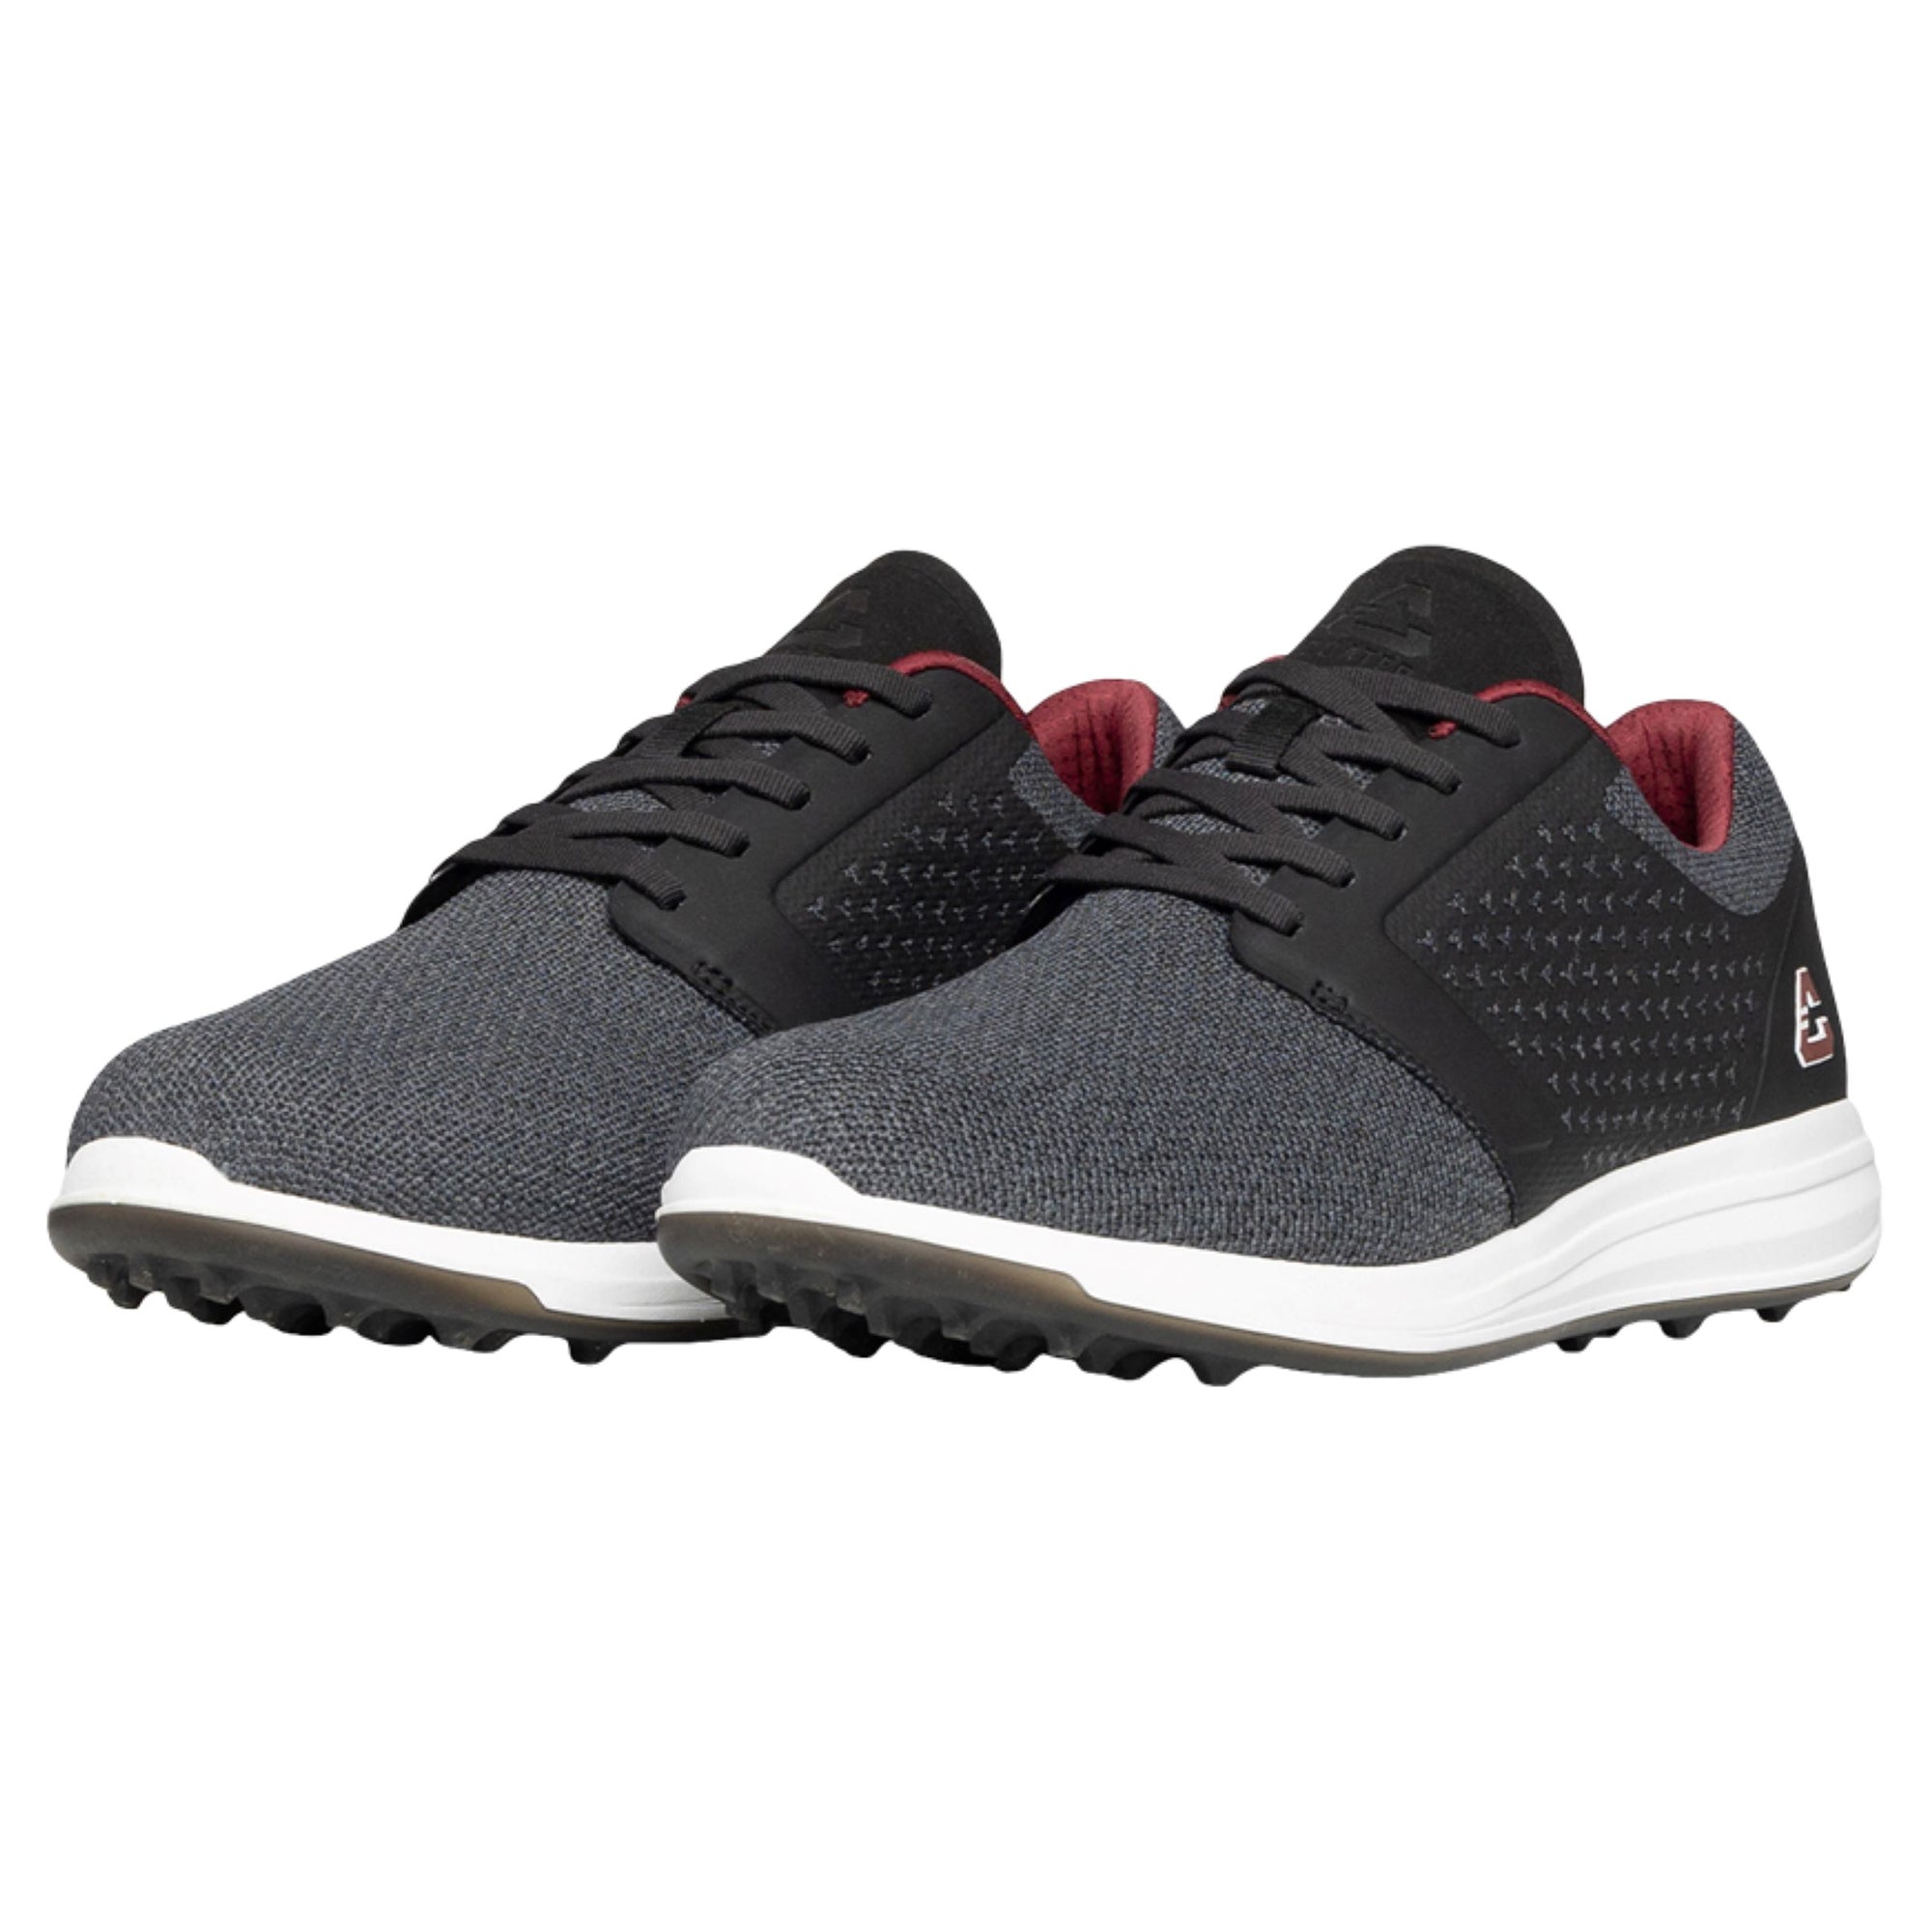 cuater-the-money-maker-golf-shoes-4mr216-black-ruby-wine-function18